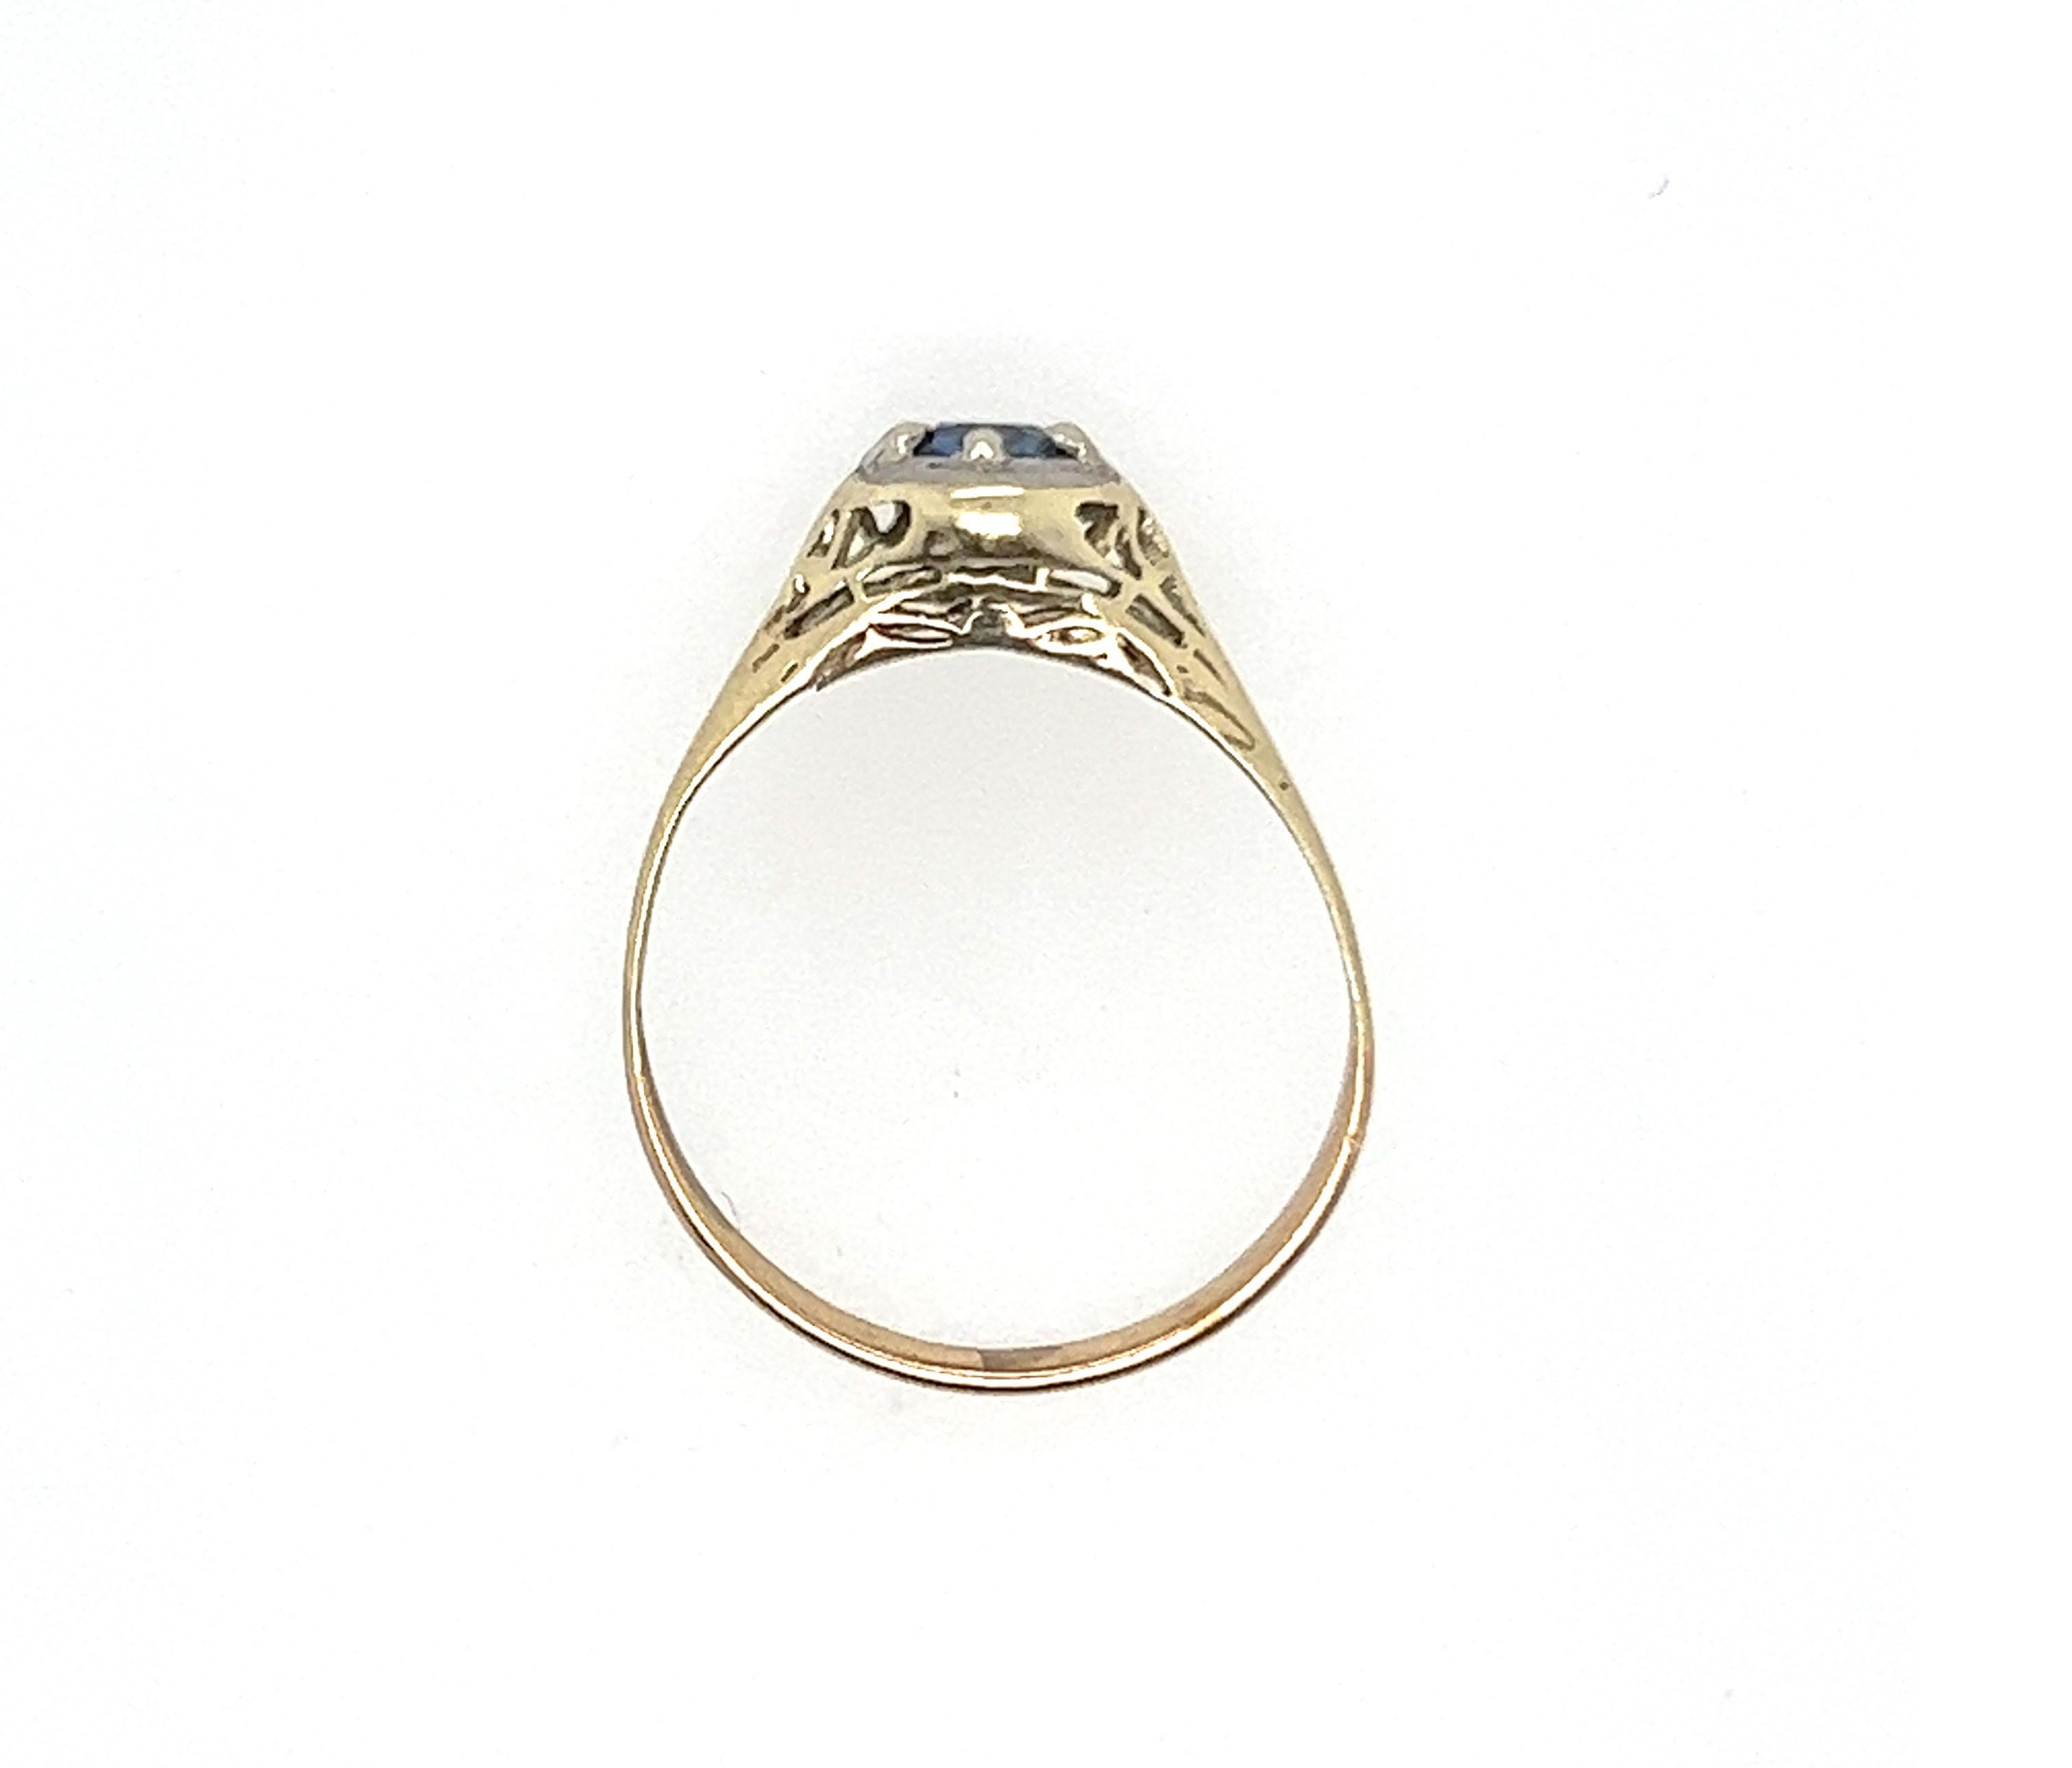 Sapphire Ring .53ct Art Deco Antique 14K


Featuring a Midnight Blue .53ct Genuine Natural Blue Round Sapphire Center

Rare Yellow Gold with White Gold Top 

100% Natural Sapphire

.53 Carat Sapphire Weight 

Solid 14K Yellow Gold/White Gold

Circa